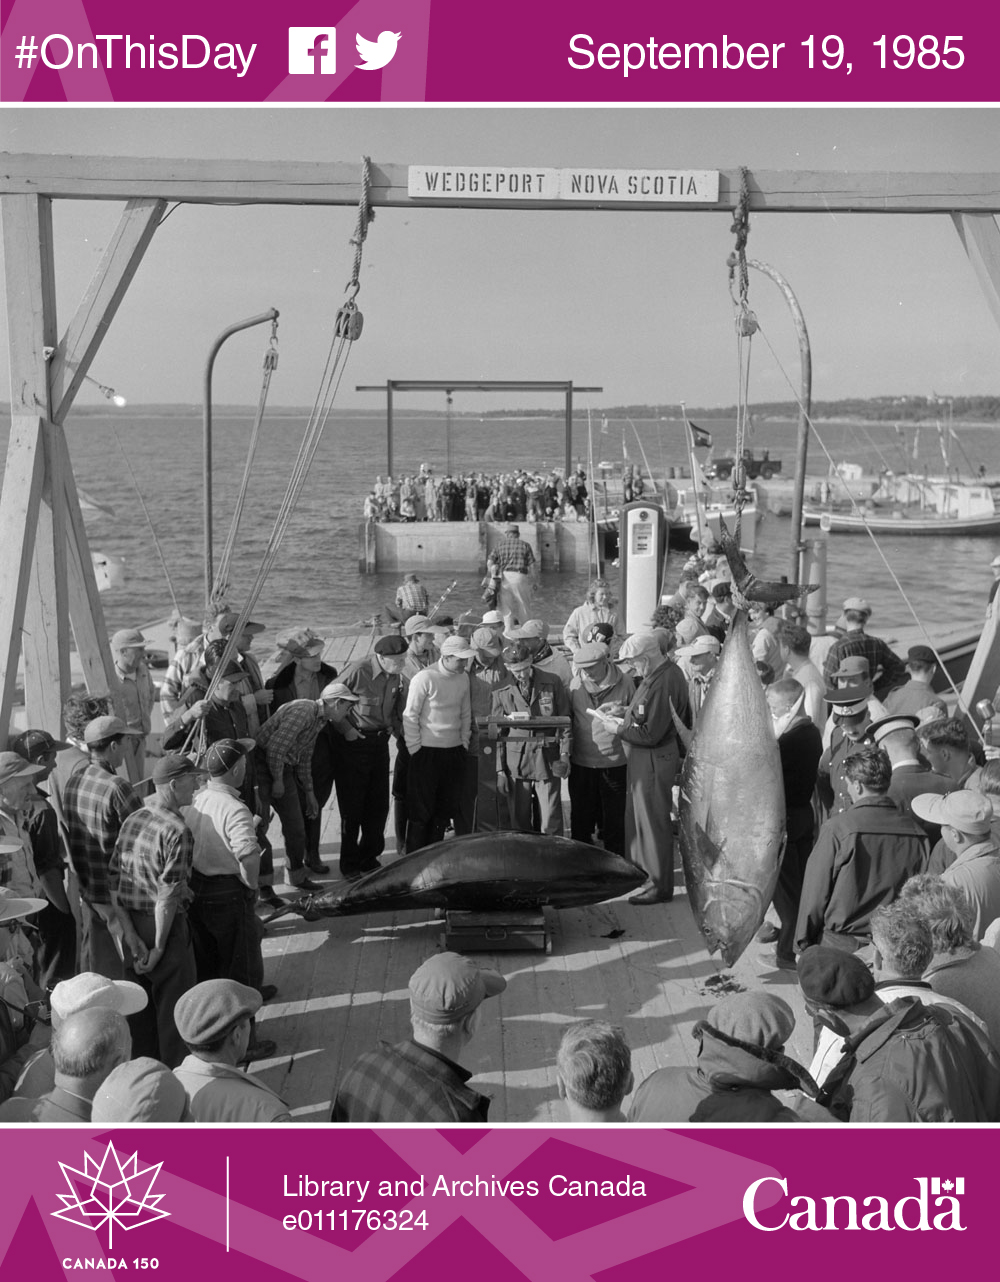 Photo of a 977 pound tuna being weighed in Nova Scotia, 1956